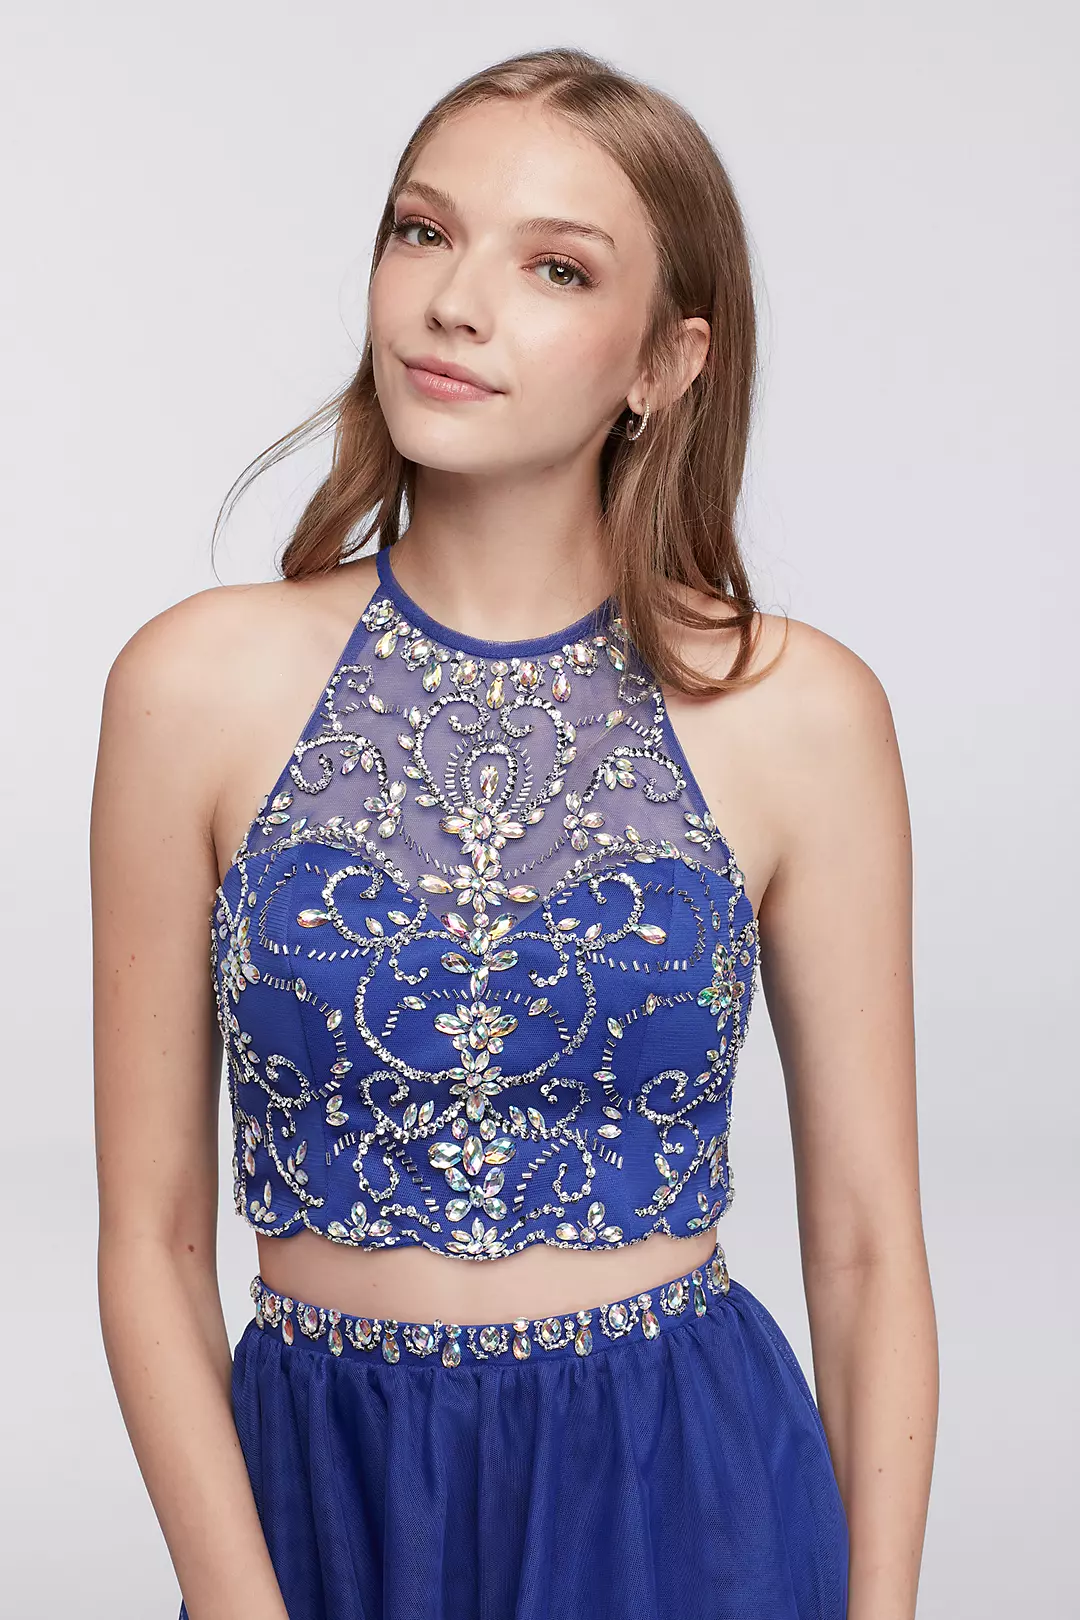 Homecoming Halter Crop Top and Matching Skirt Image 3